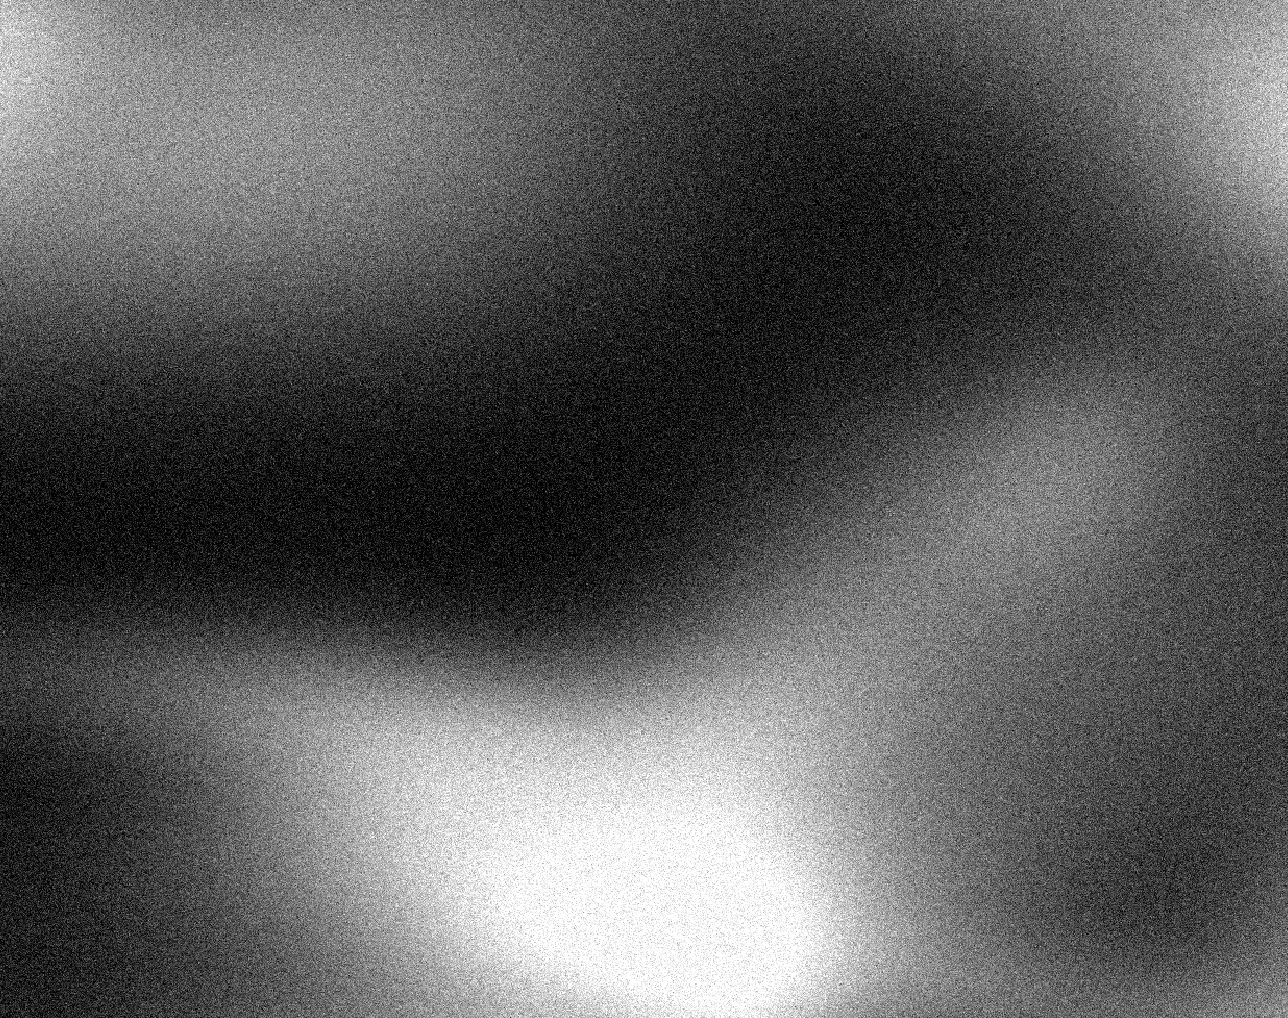 a gray and white image with different 'humps' of darker and lighter colors; it's kind of grainy